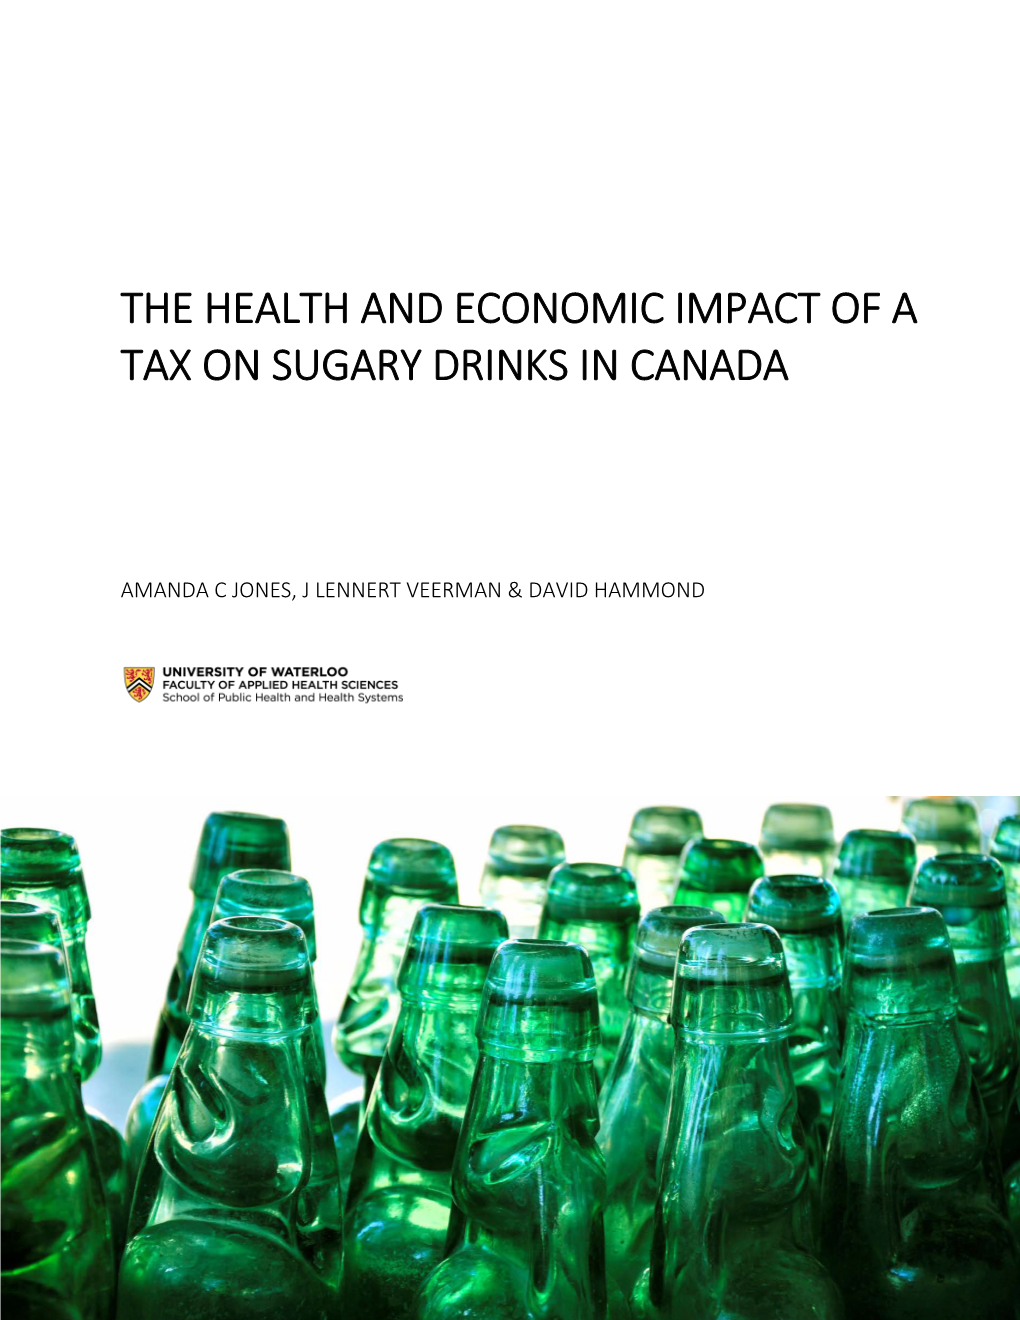 The Health and Economic Impact of a Tax on Sugary Drinks in Canada